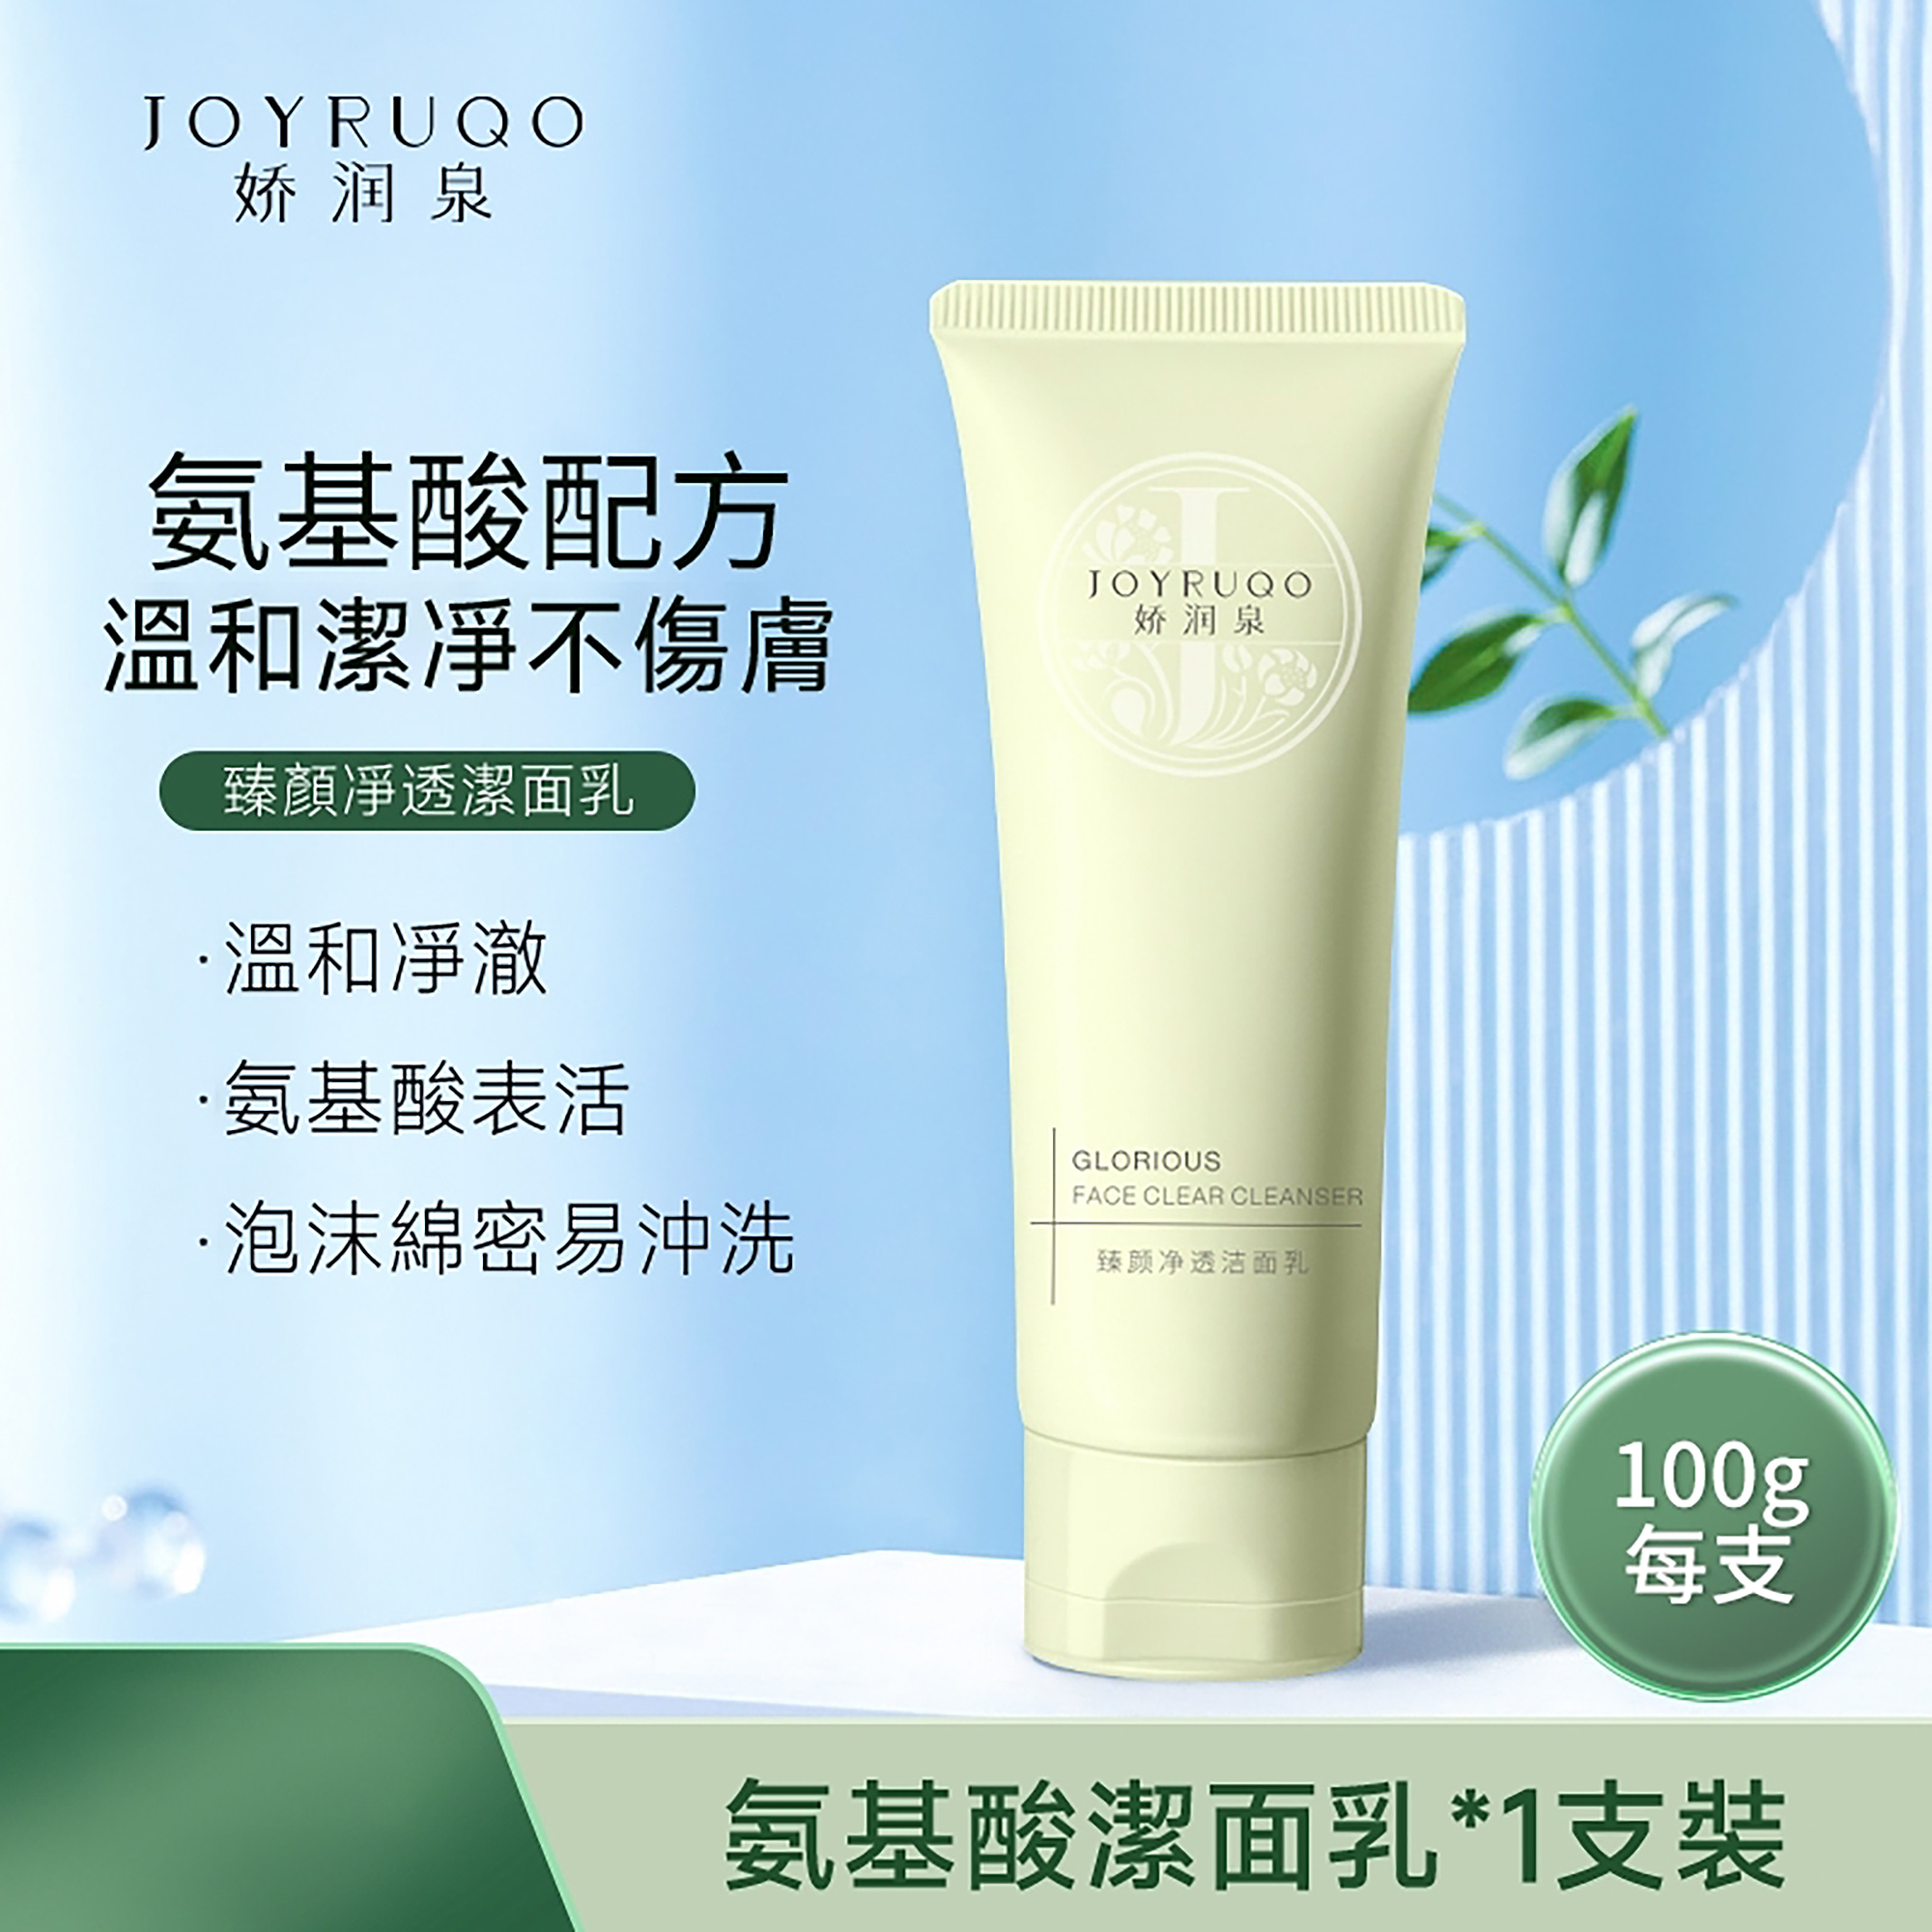 Glorious Face Clear Cleanser